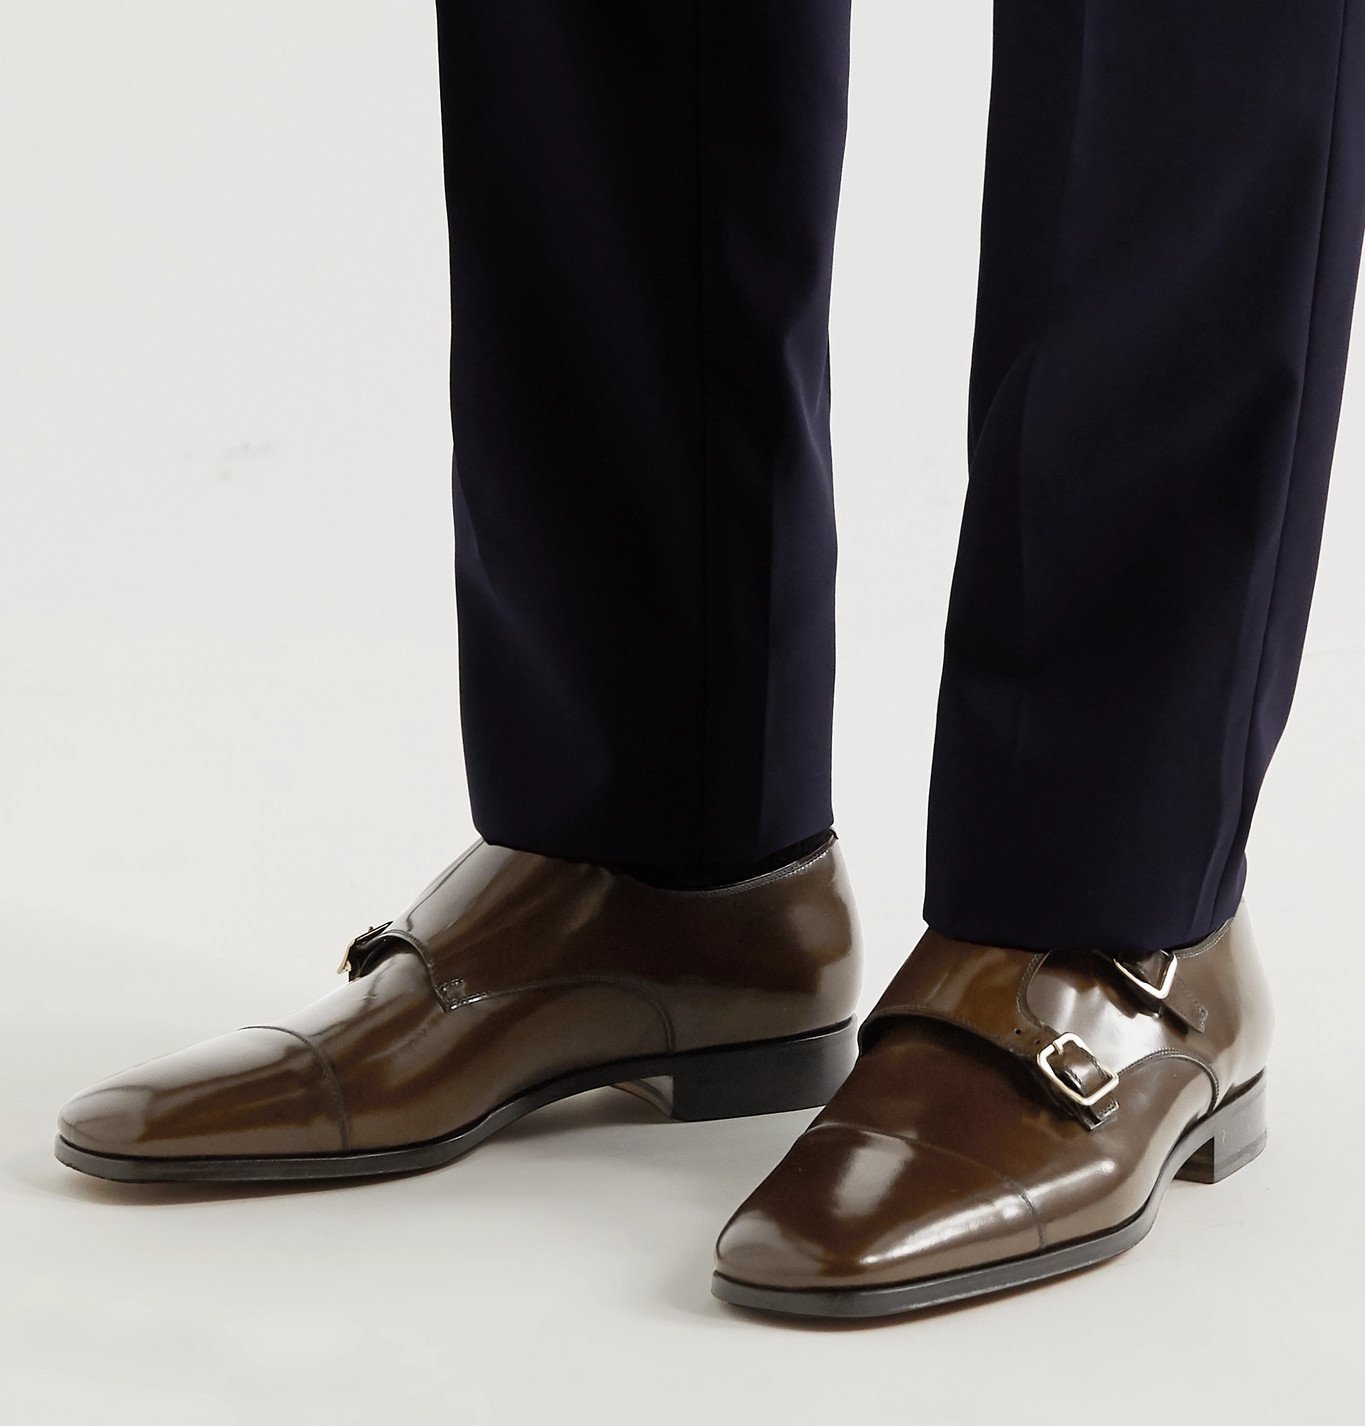 TOM FORD - Spazzolato Leather Monk-Strap Shoes - Brown TOM FORD